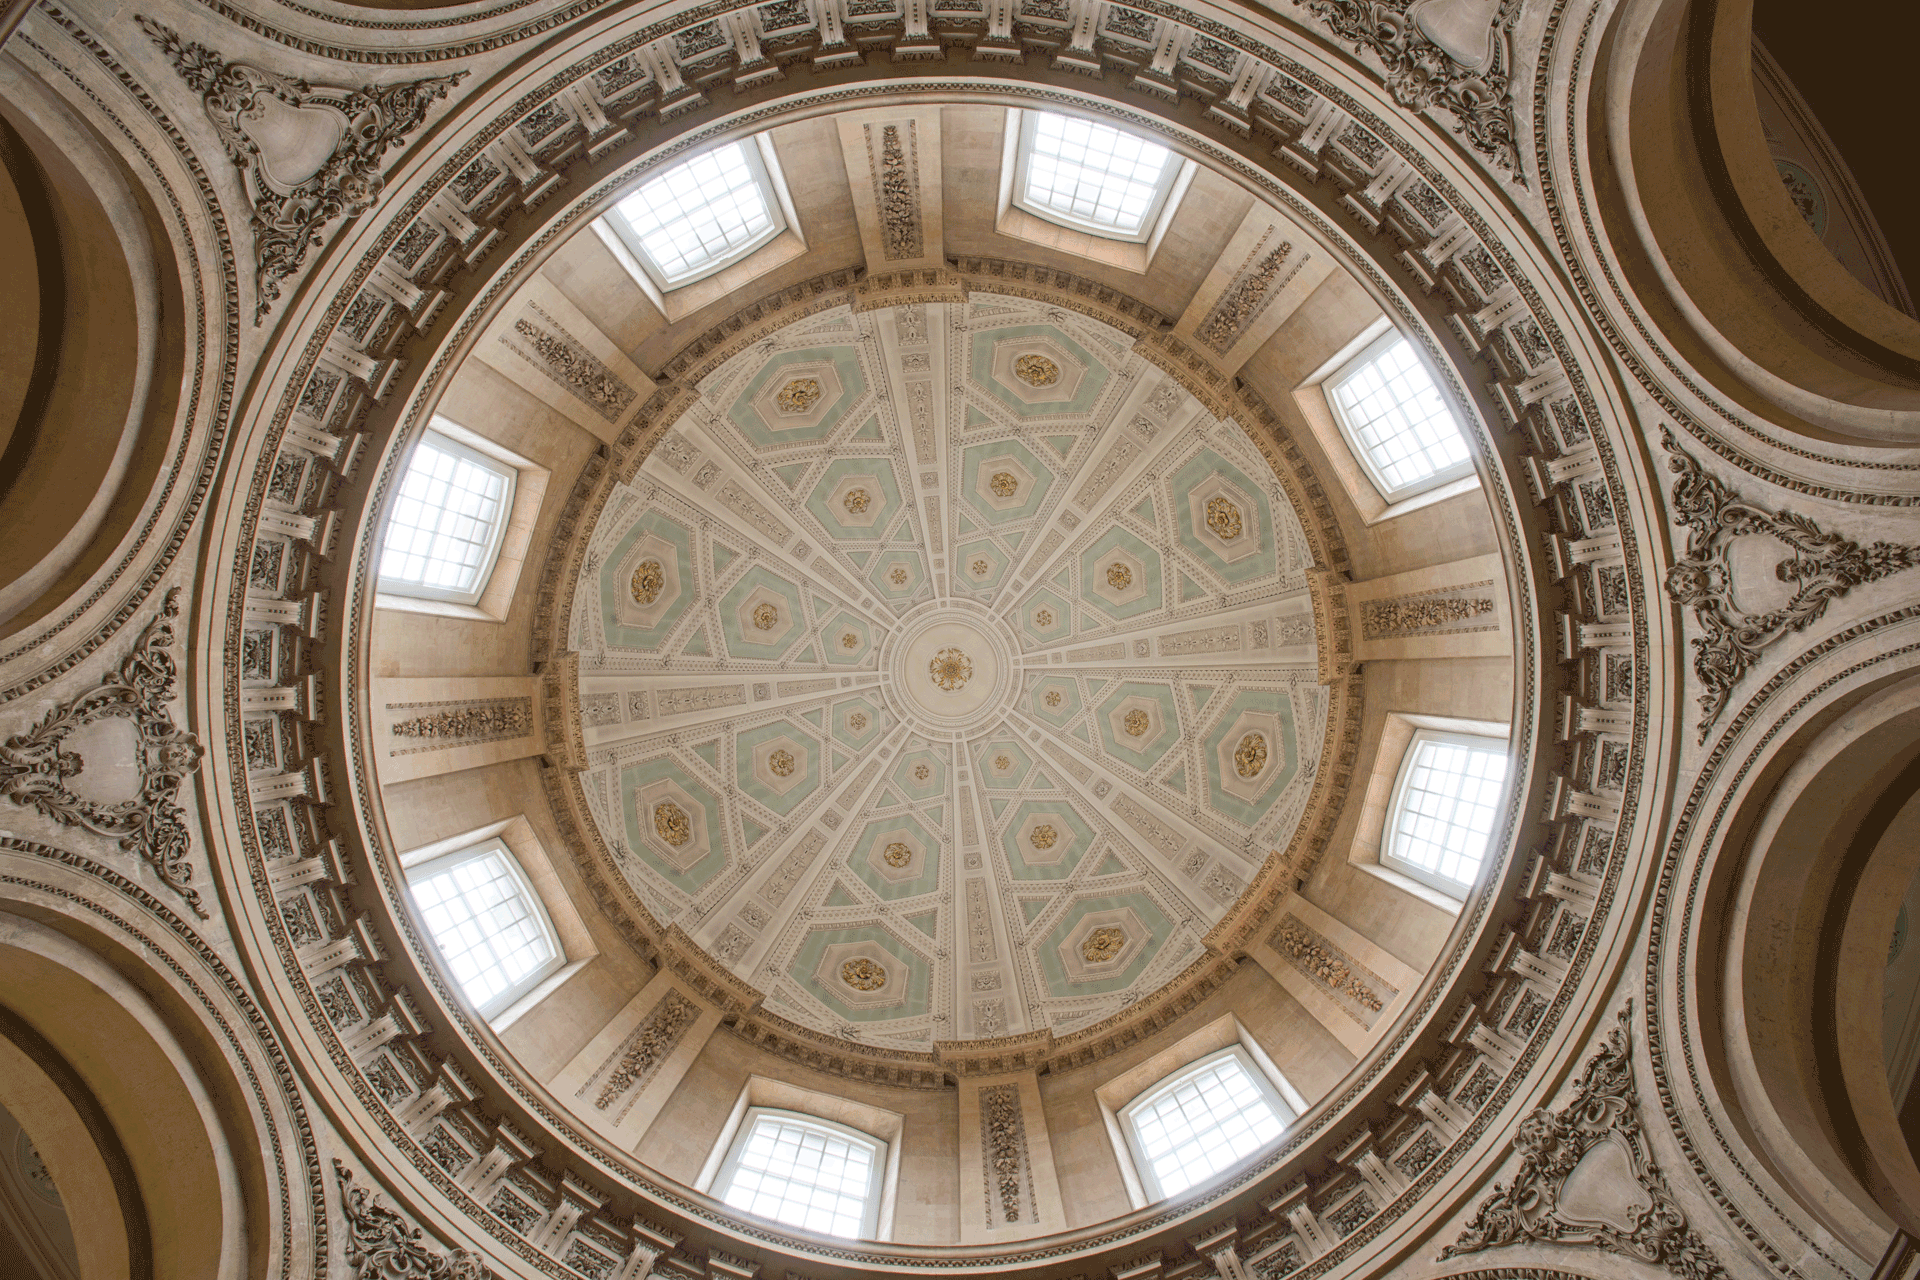 The domed ceiling of the Radcliffe Camera, Oxford.